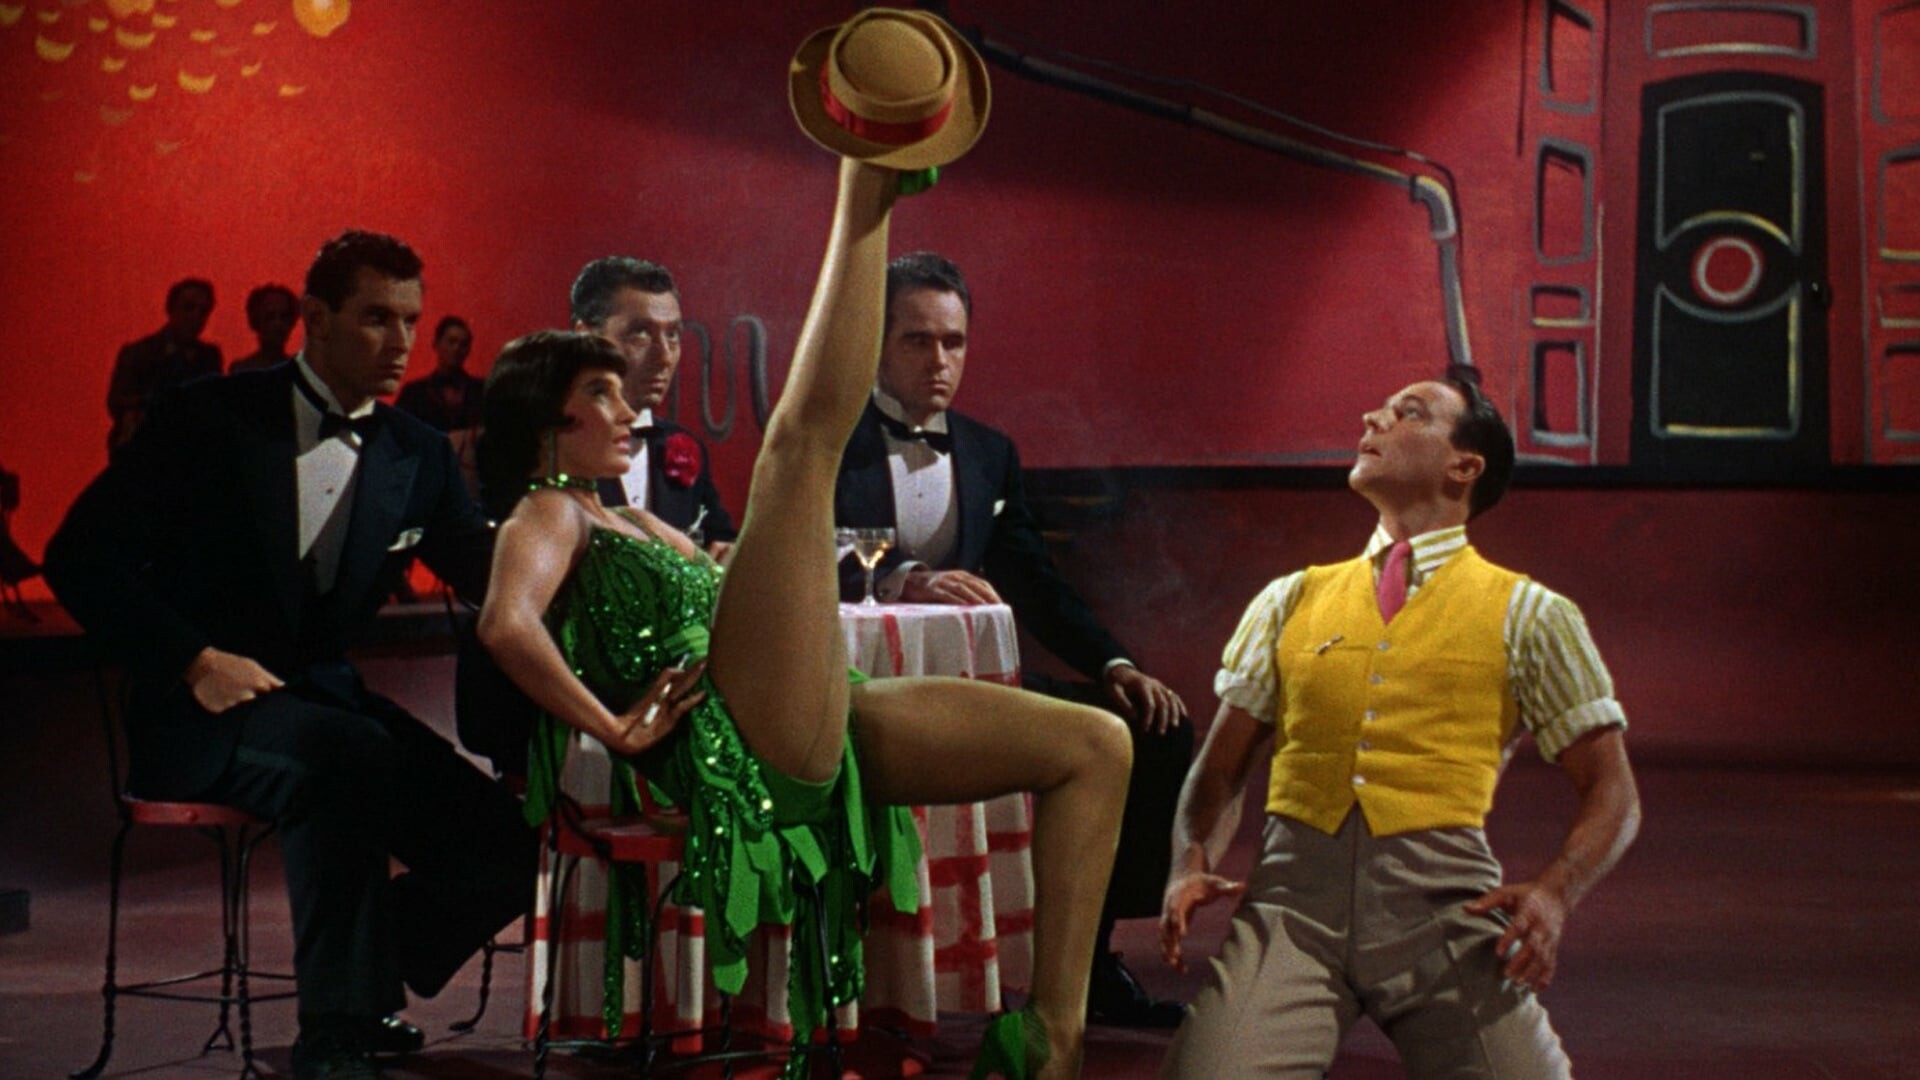 Singin' in the Rain: Cyd Charisse as the woman in the green dress who vamps Gene Kelly in the "Broadway Melody" sequence. 1920x1080 Full HD Wallpaper.